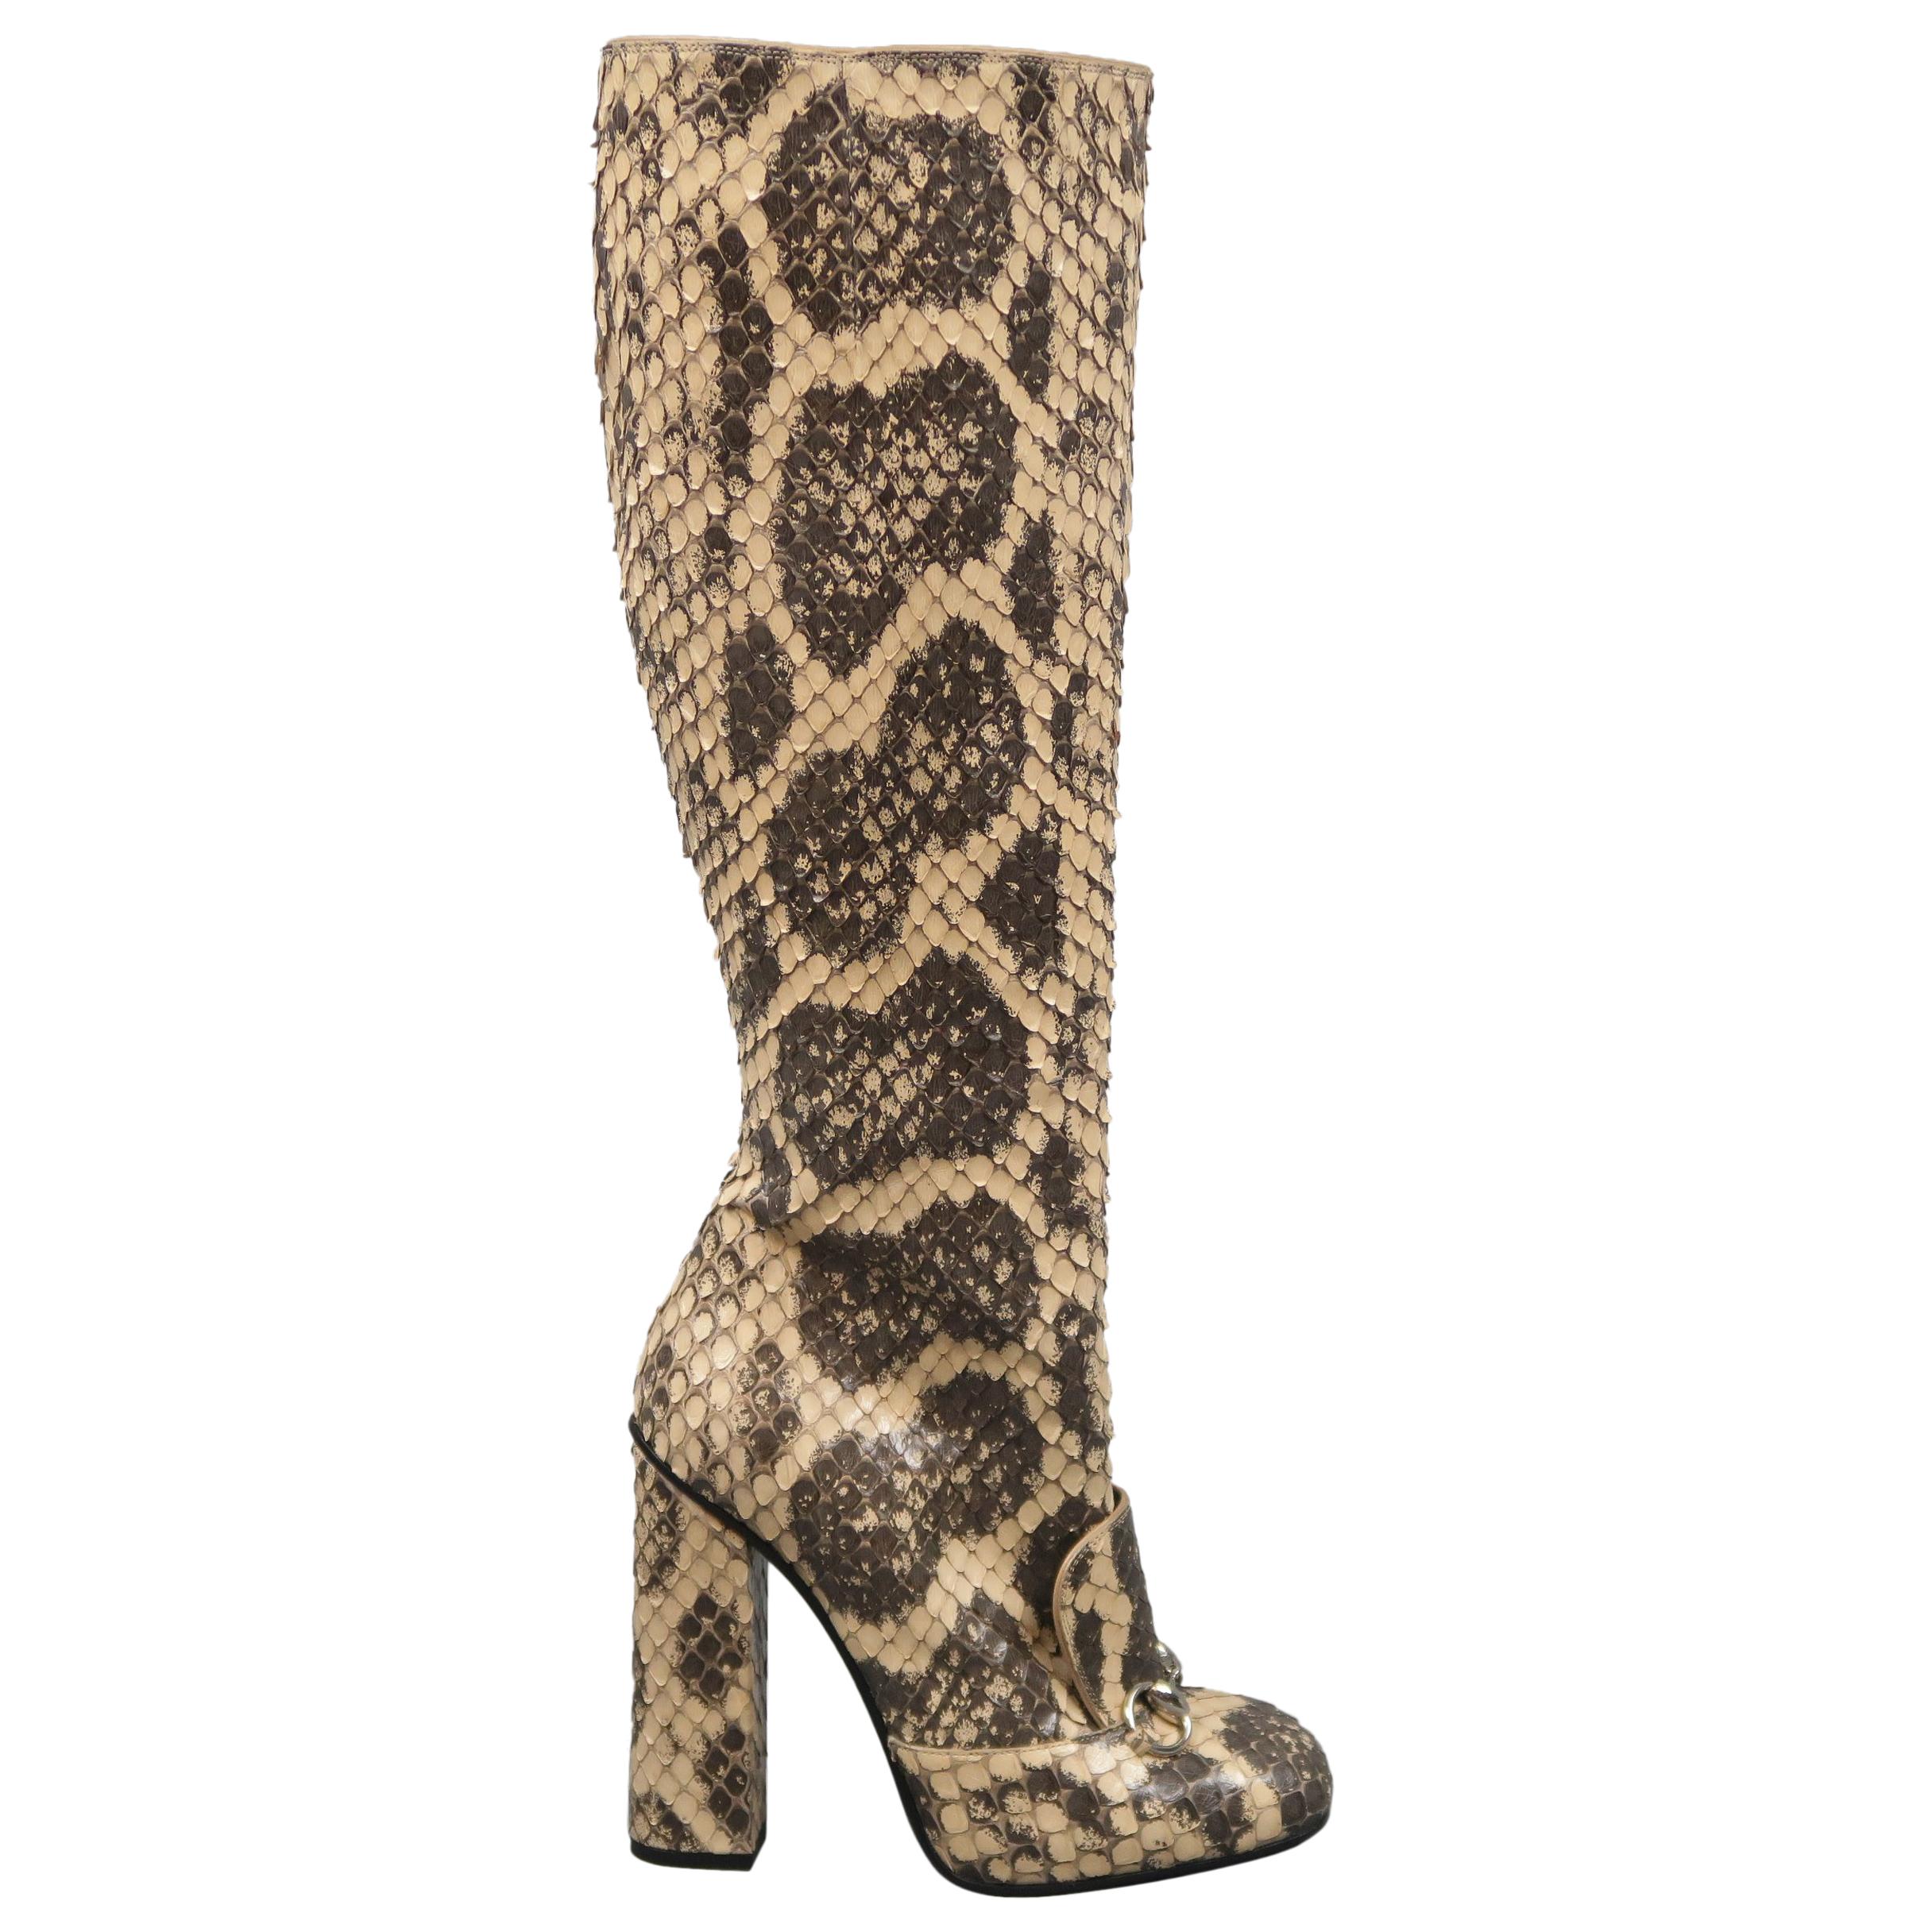 GUCCI Size 7.5 Beige Phython Snakeskin Leather Horsebit Knee High Boots ...